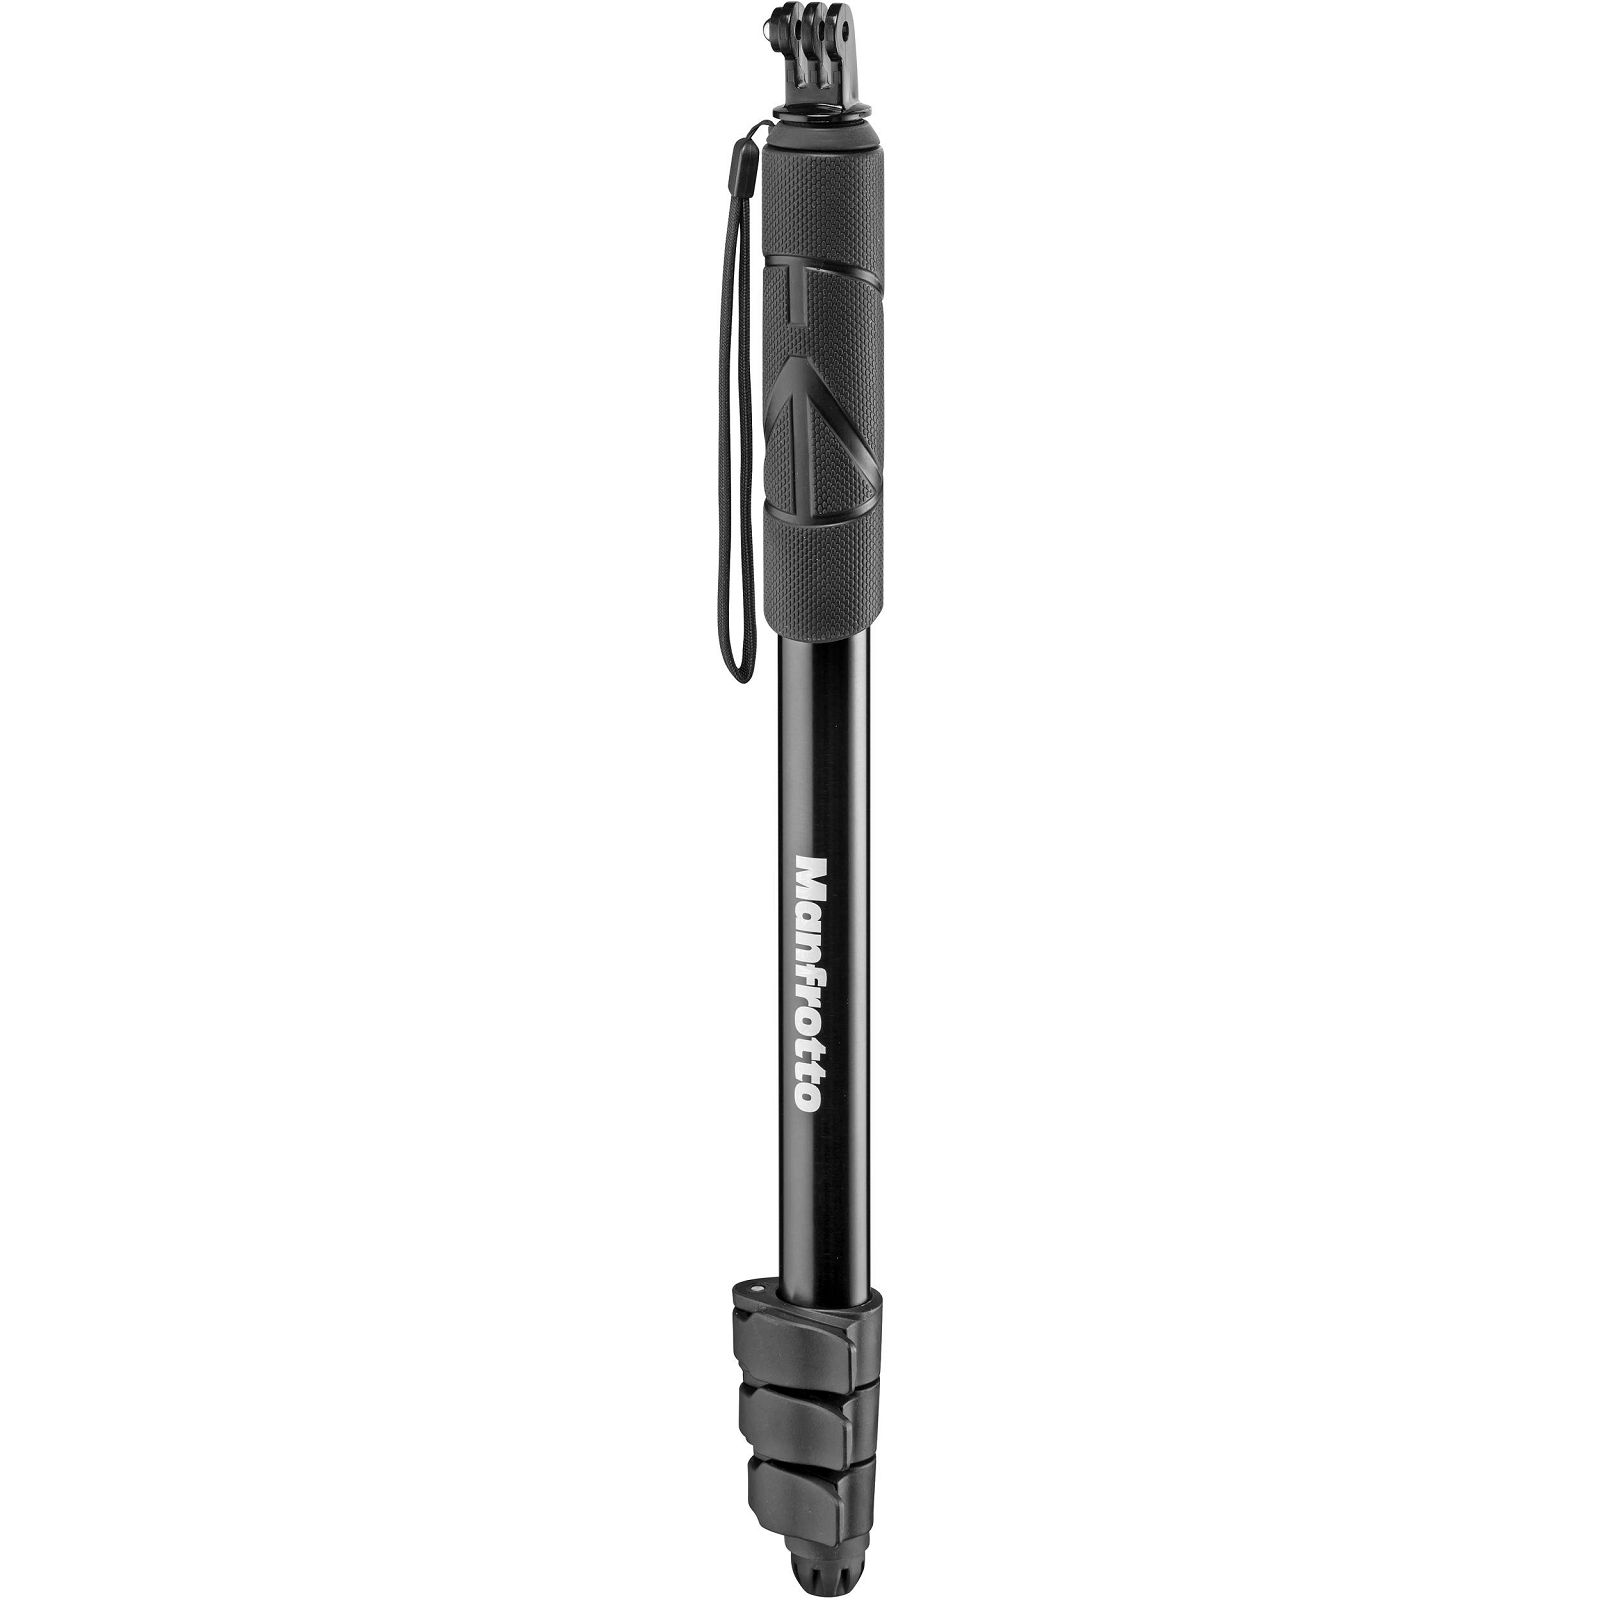 Manfrotto MPCOMPACT-BK 131cm 1kg Black Compact Extreme 2-in-1 Monopod and Pole selfie stick